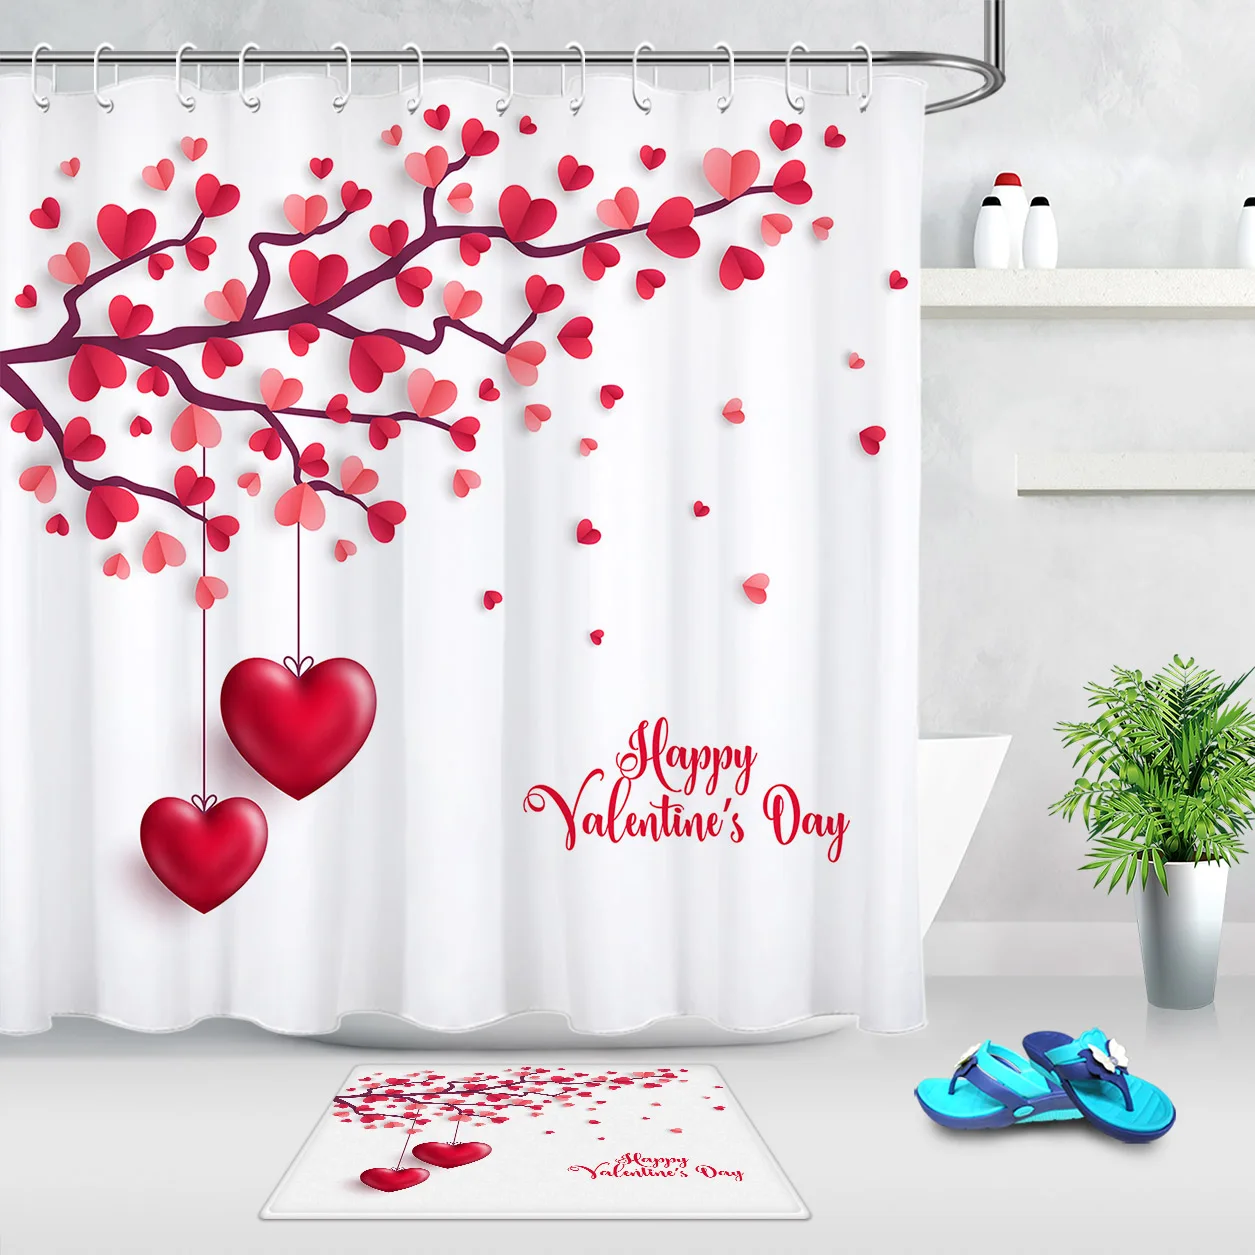 Details about   Happy Valentine's Day Red Heart Balloons Shower Curtain Sets For Bathroom Decor 